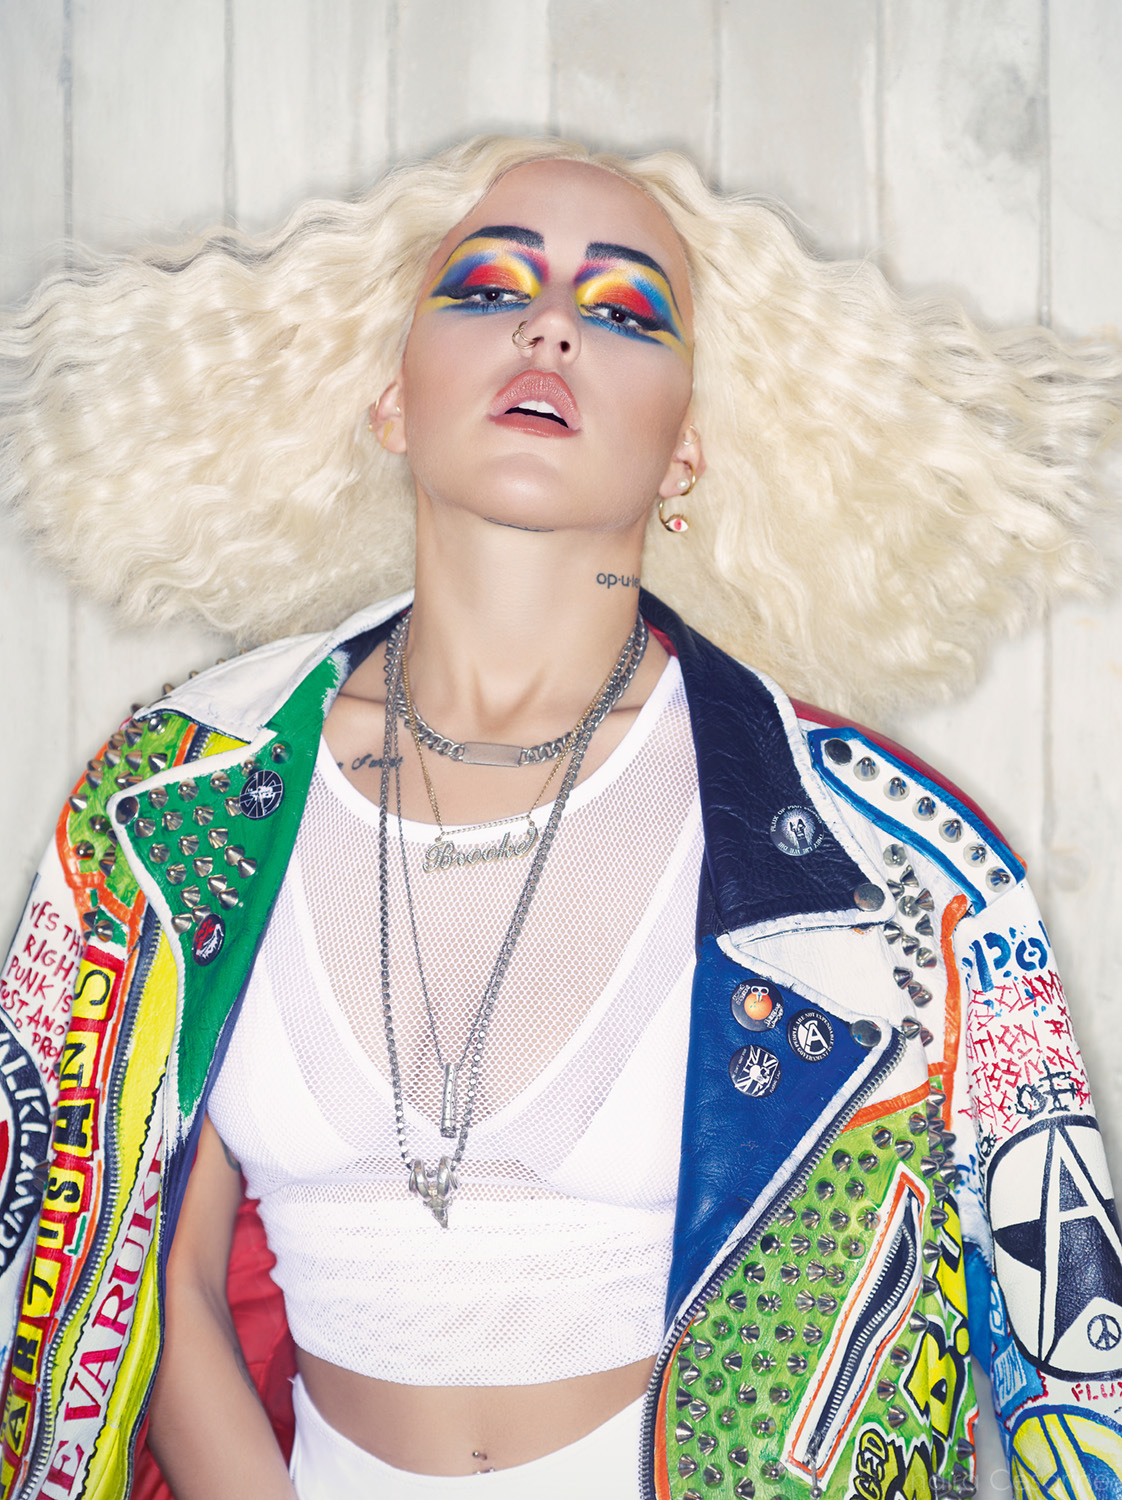 Brooke-Candy-Photography-by-Indira-Cesarine-013.jpg